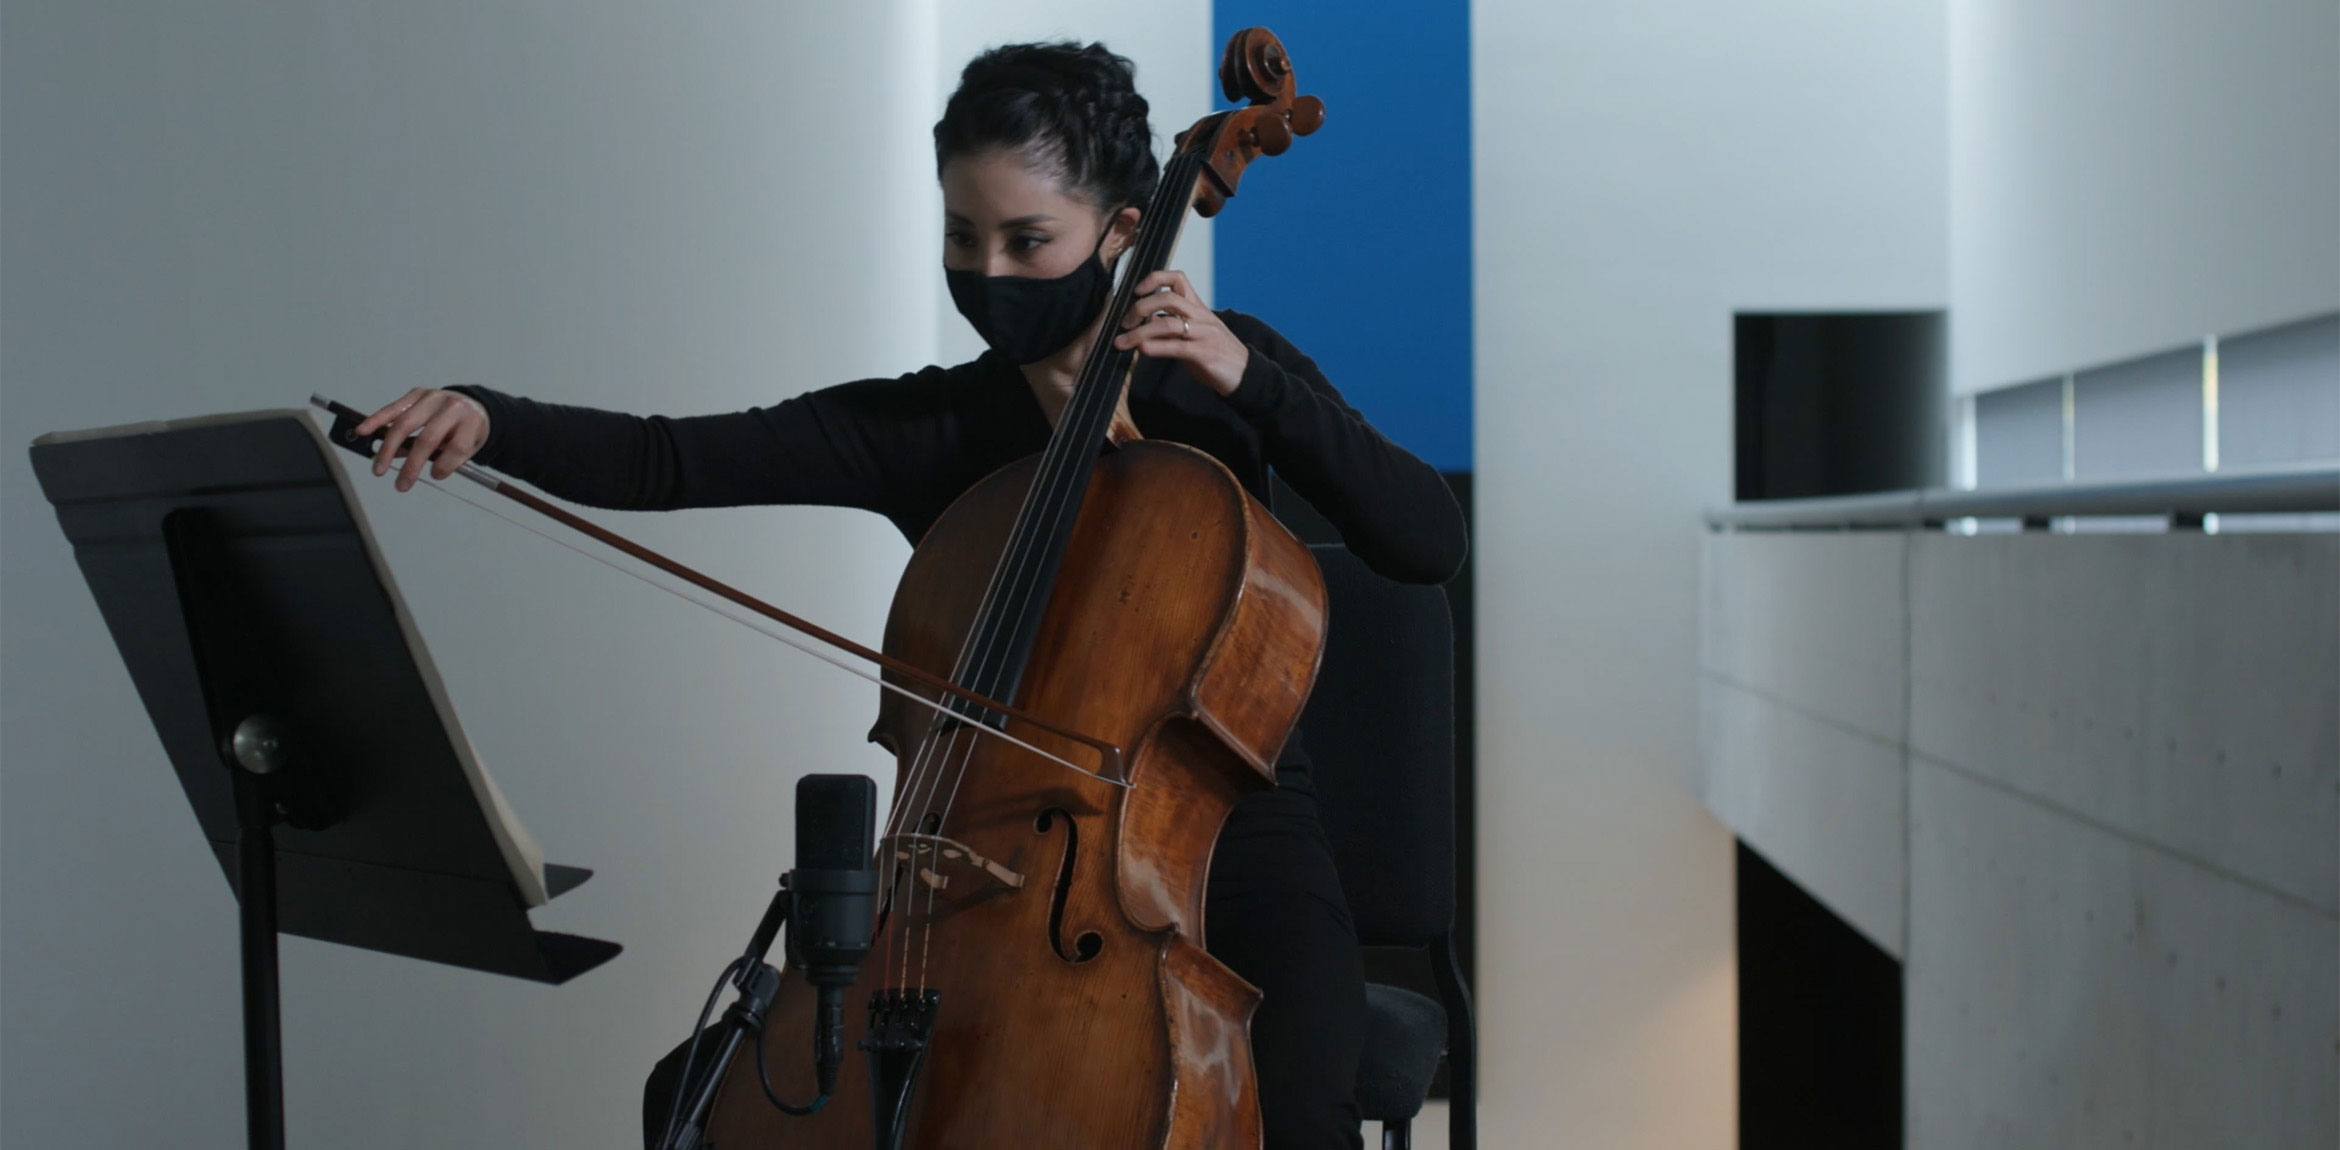 Cellist Elizabeth Chung performs Nathalie Joachim's "Dam Mwen Yo" at the top of the Main Staircase, reading from a music stand. Ellsworth Kelly's "Blue Black" is seen behind them.